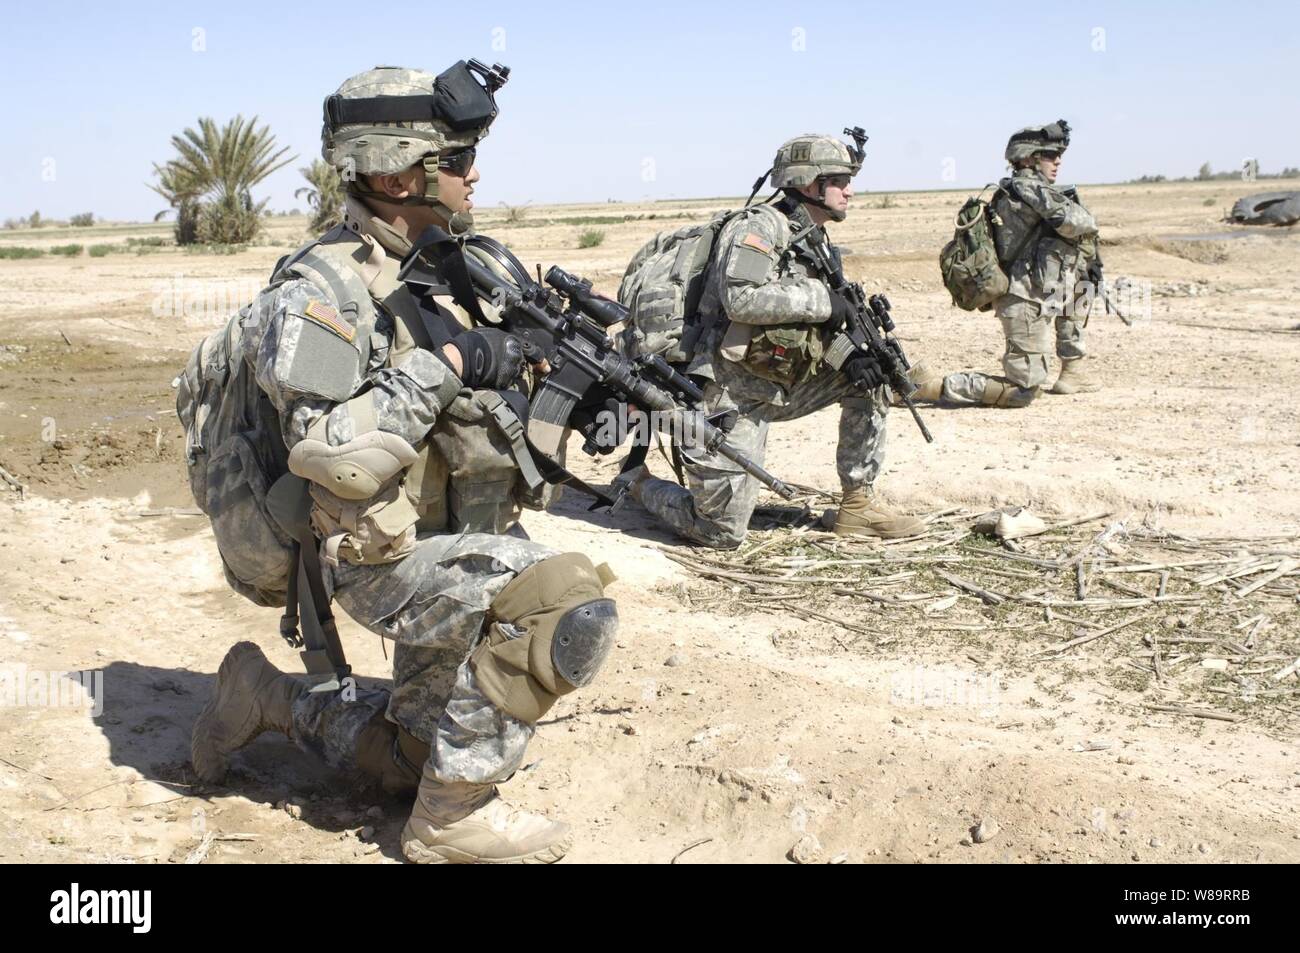 U.S. Army soldiers take a break as they advance through a field during Operation Swarmer in the Salah Ad Din province of Iraq on March 16, 2006.  Operation Swarmer is a combined air assault operation to clear the area northeast of Samarra of suspected insurgents.  The soldiers are from the Armyís 3rd Battalion, 187th Infantry Regiment. Stock Photo